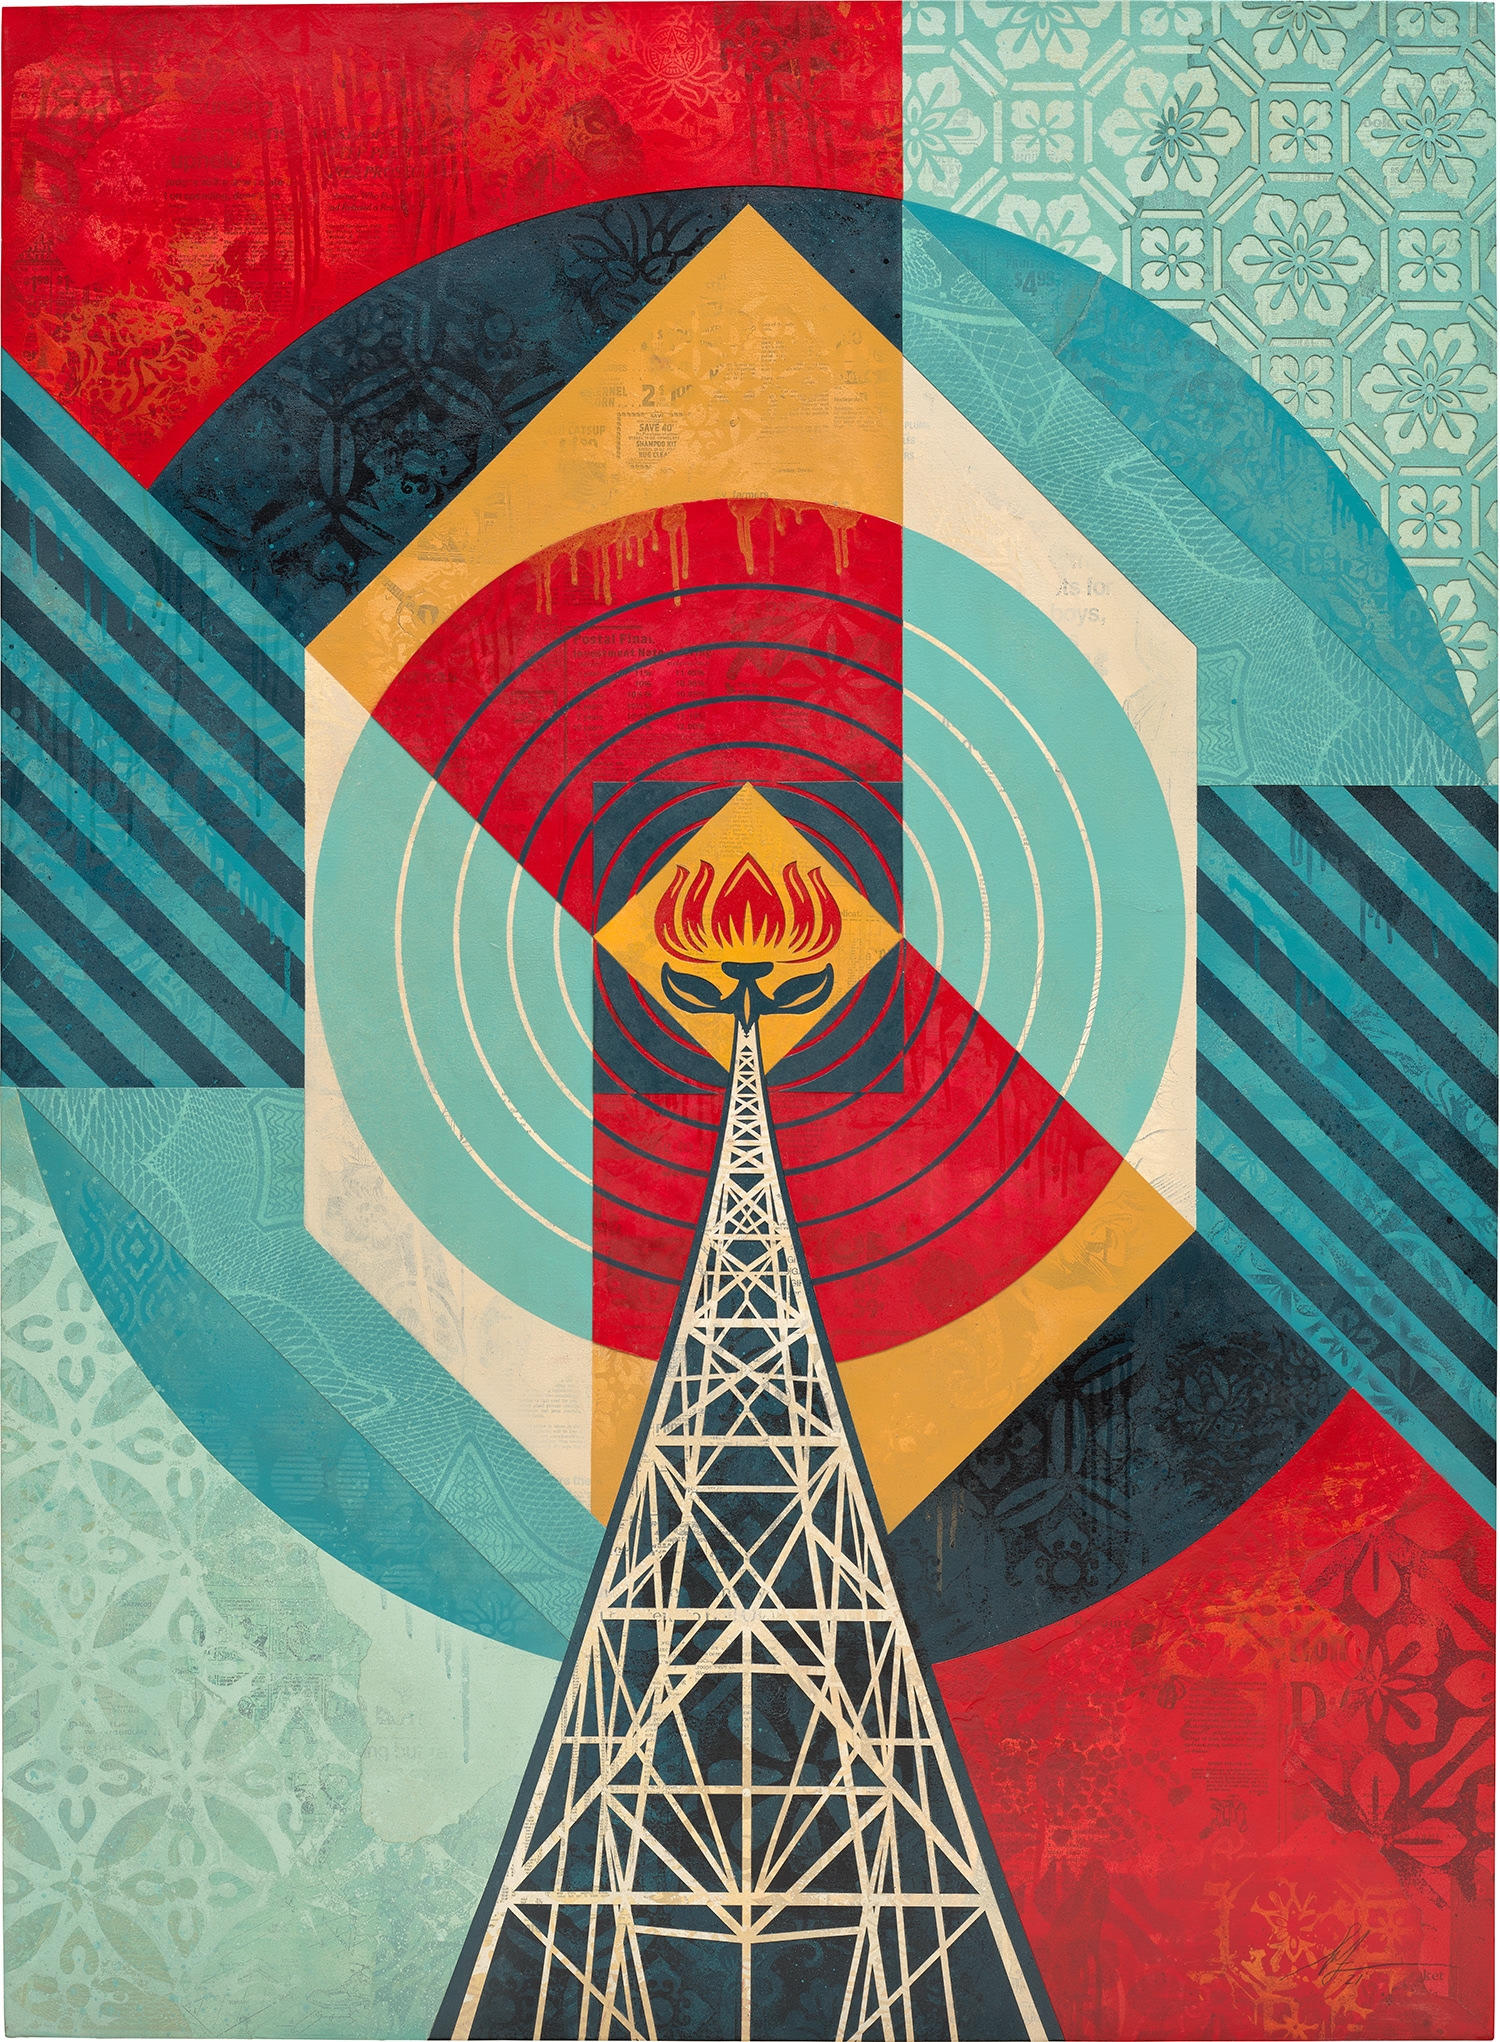 Radio Tower by Shepard Fairey, Executed in 2021